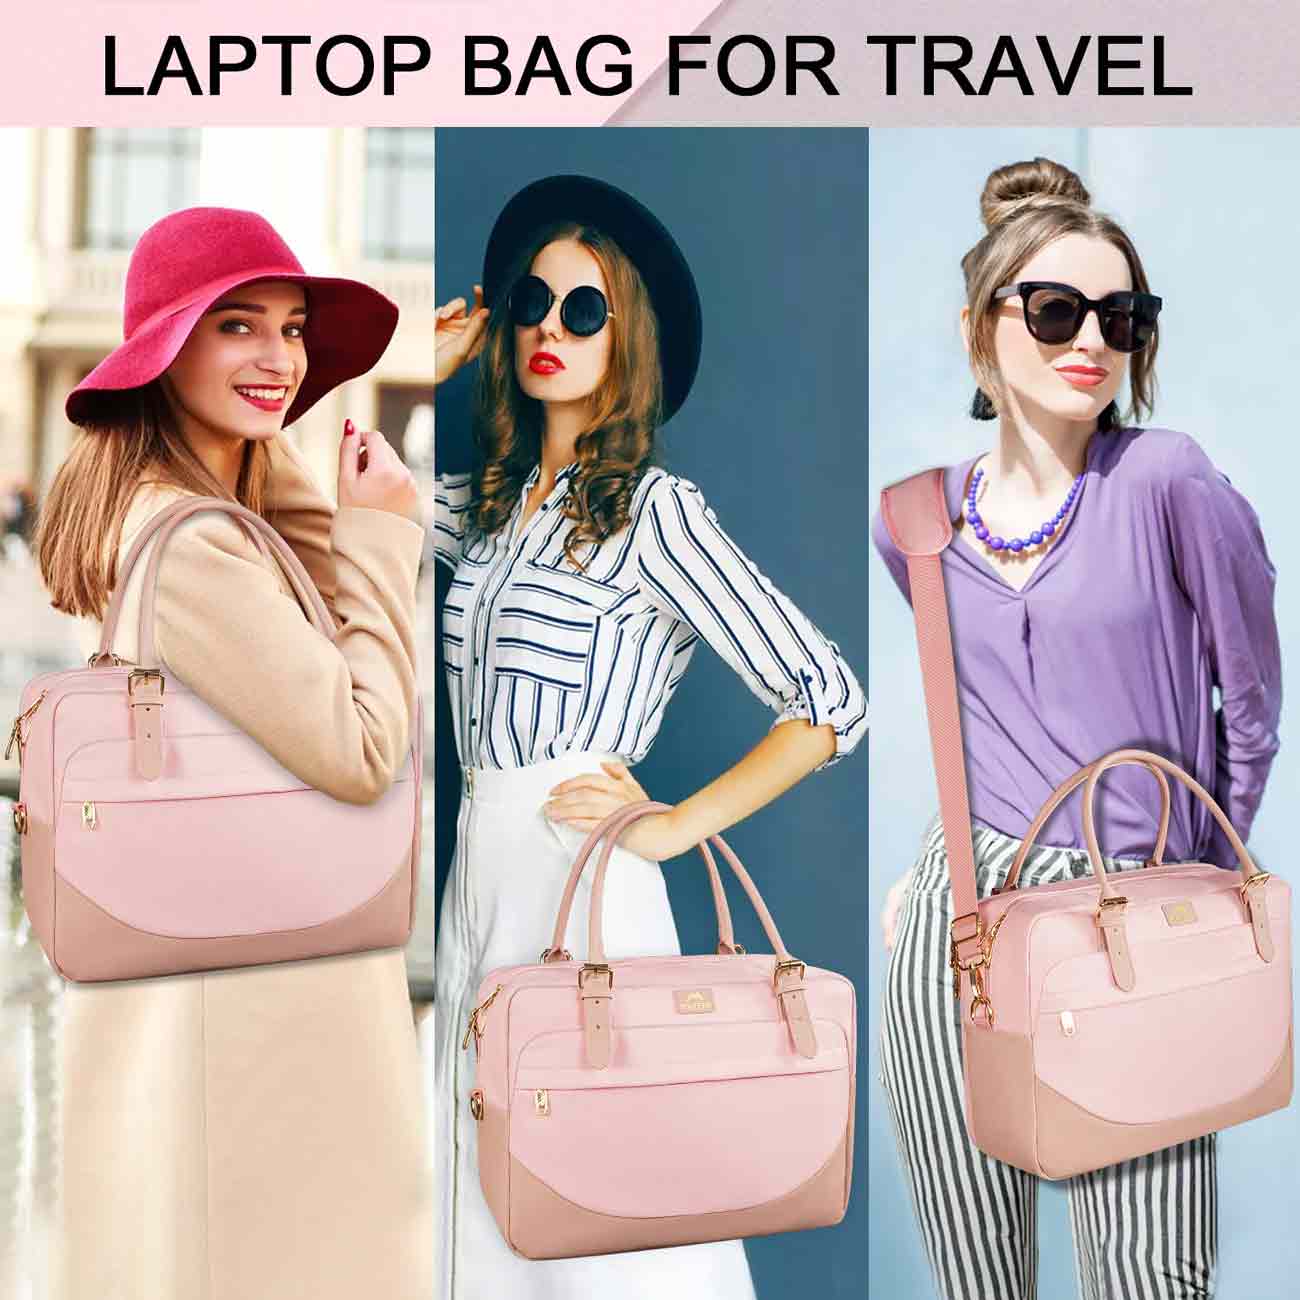 Buy Executive Laptop Bag for women in India (Nude Pink) | Tan & Loom